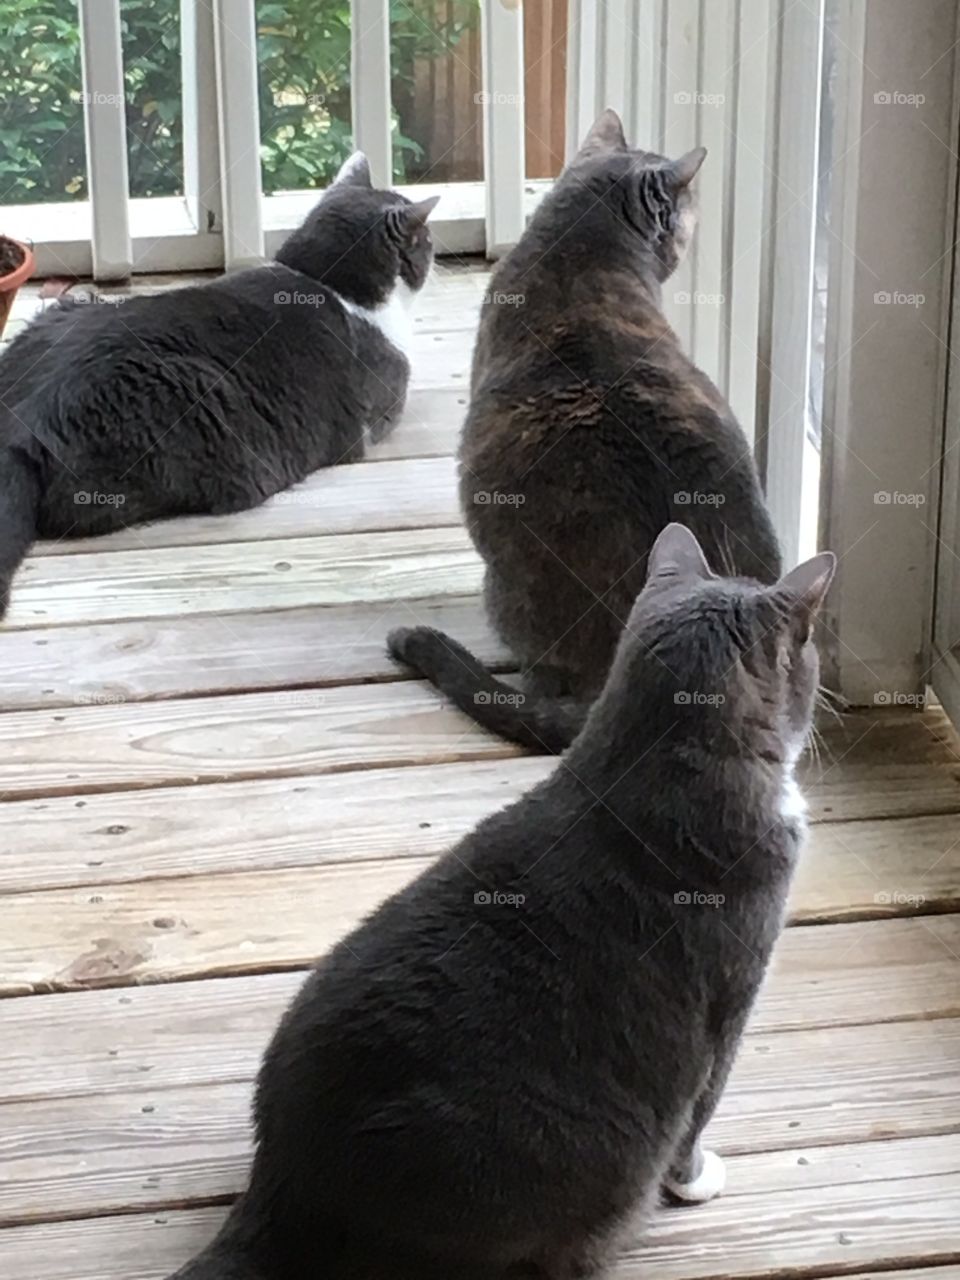 Looking at the squirrel